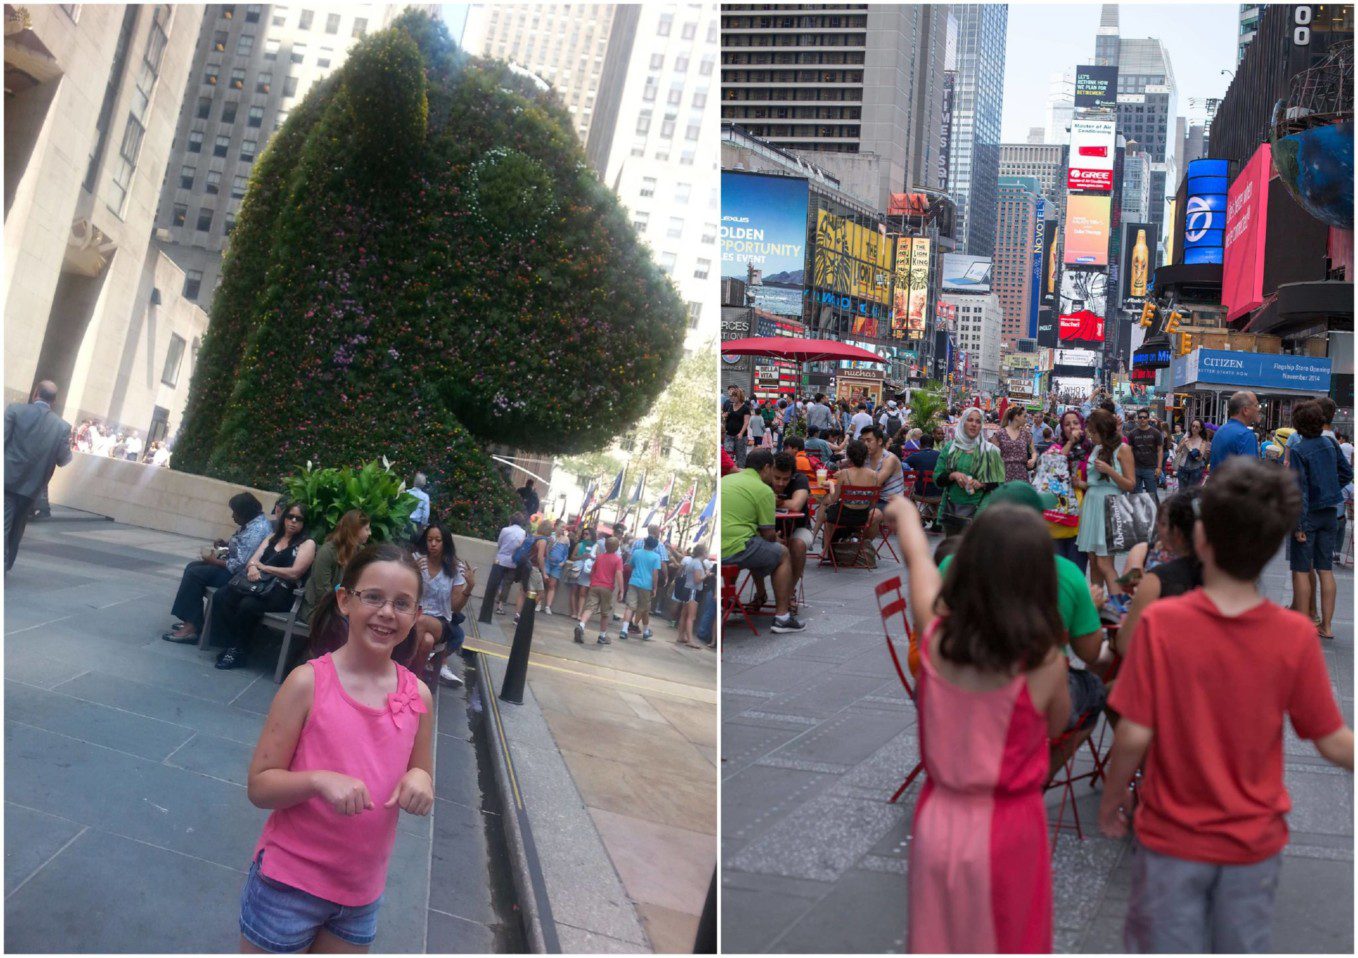 little girl and crowds in Time Square, NYC